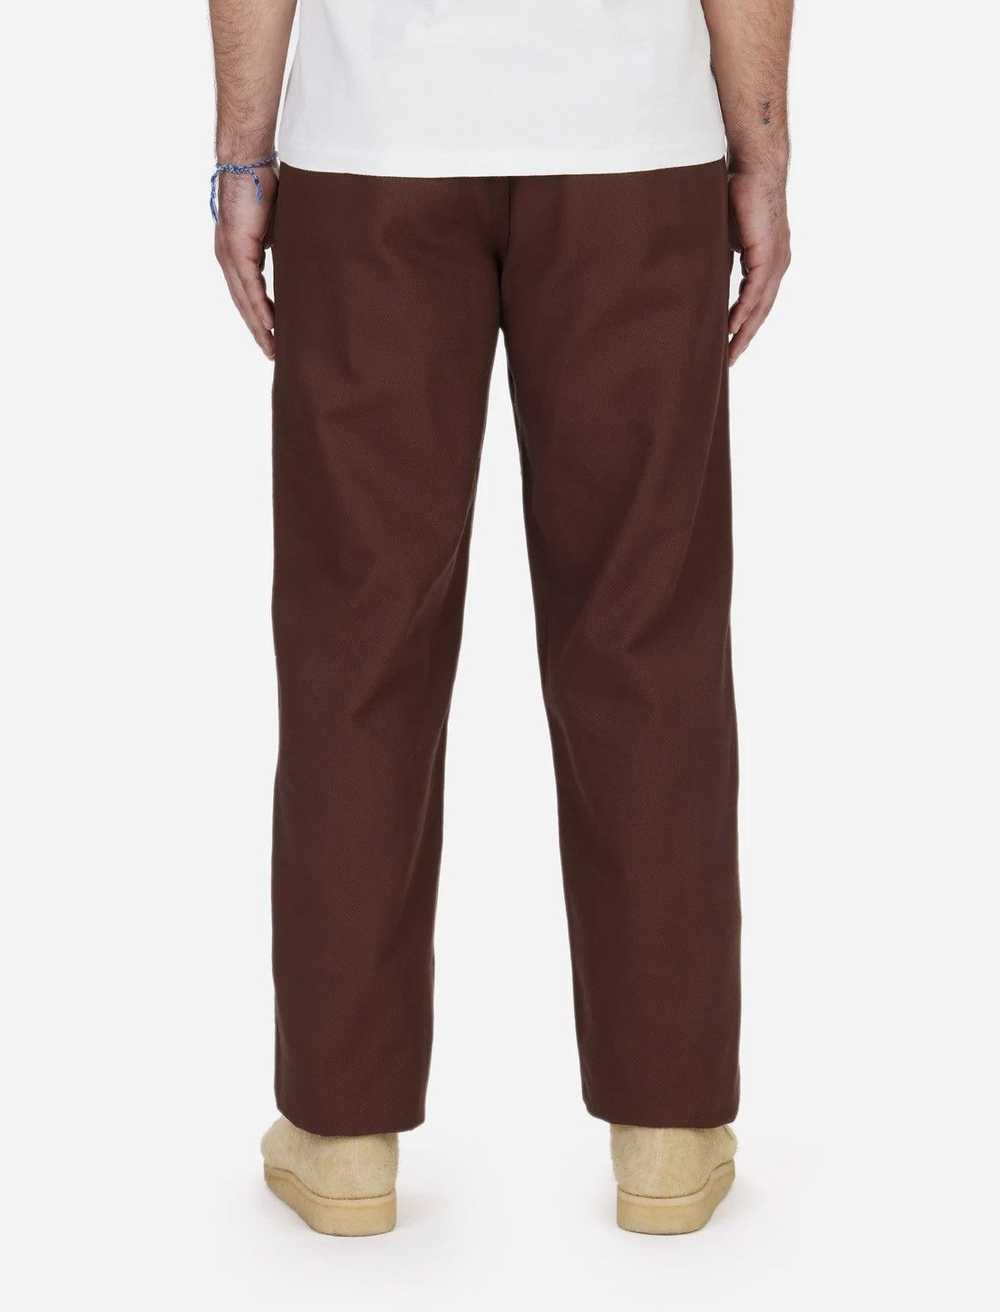 3sixteen Work Pant in Espresso Twill - image 4